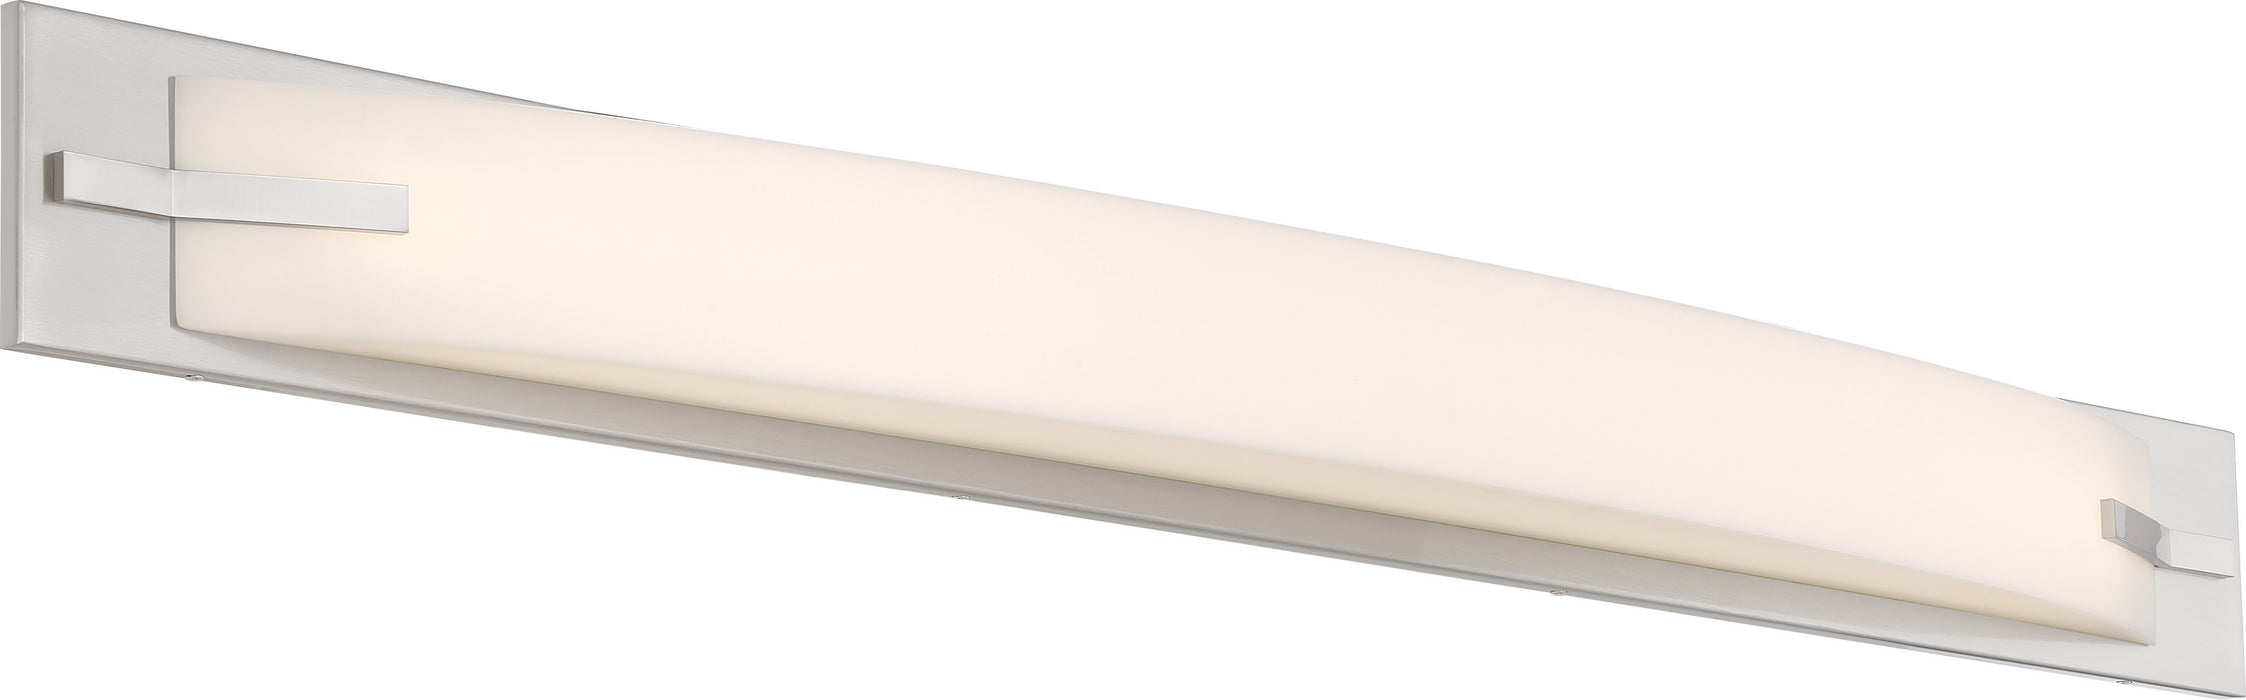 SATCO/NUVO Bow LED 39 Inch Vanity Fixture Brushed Nickel Finish (62-1083)